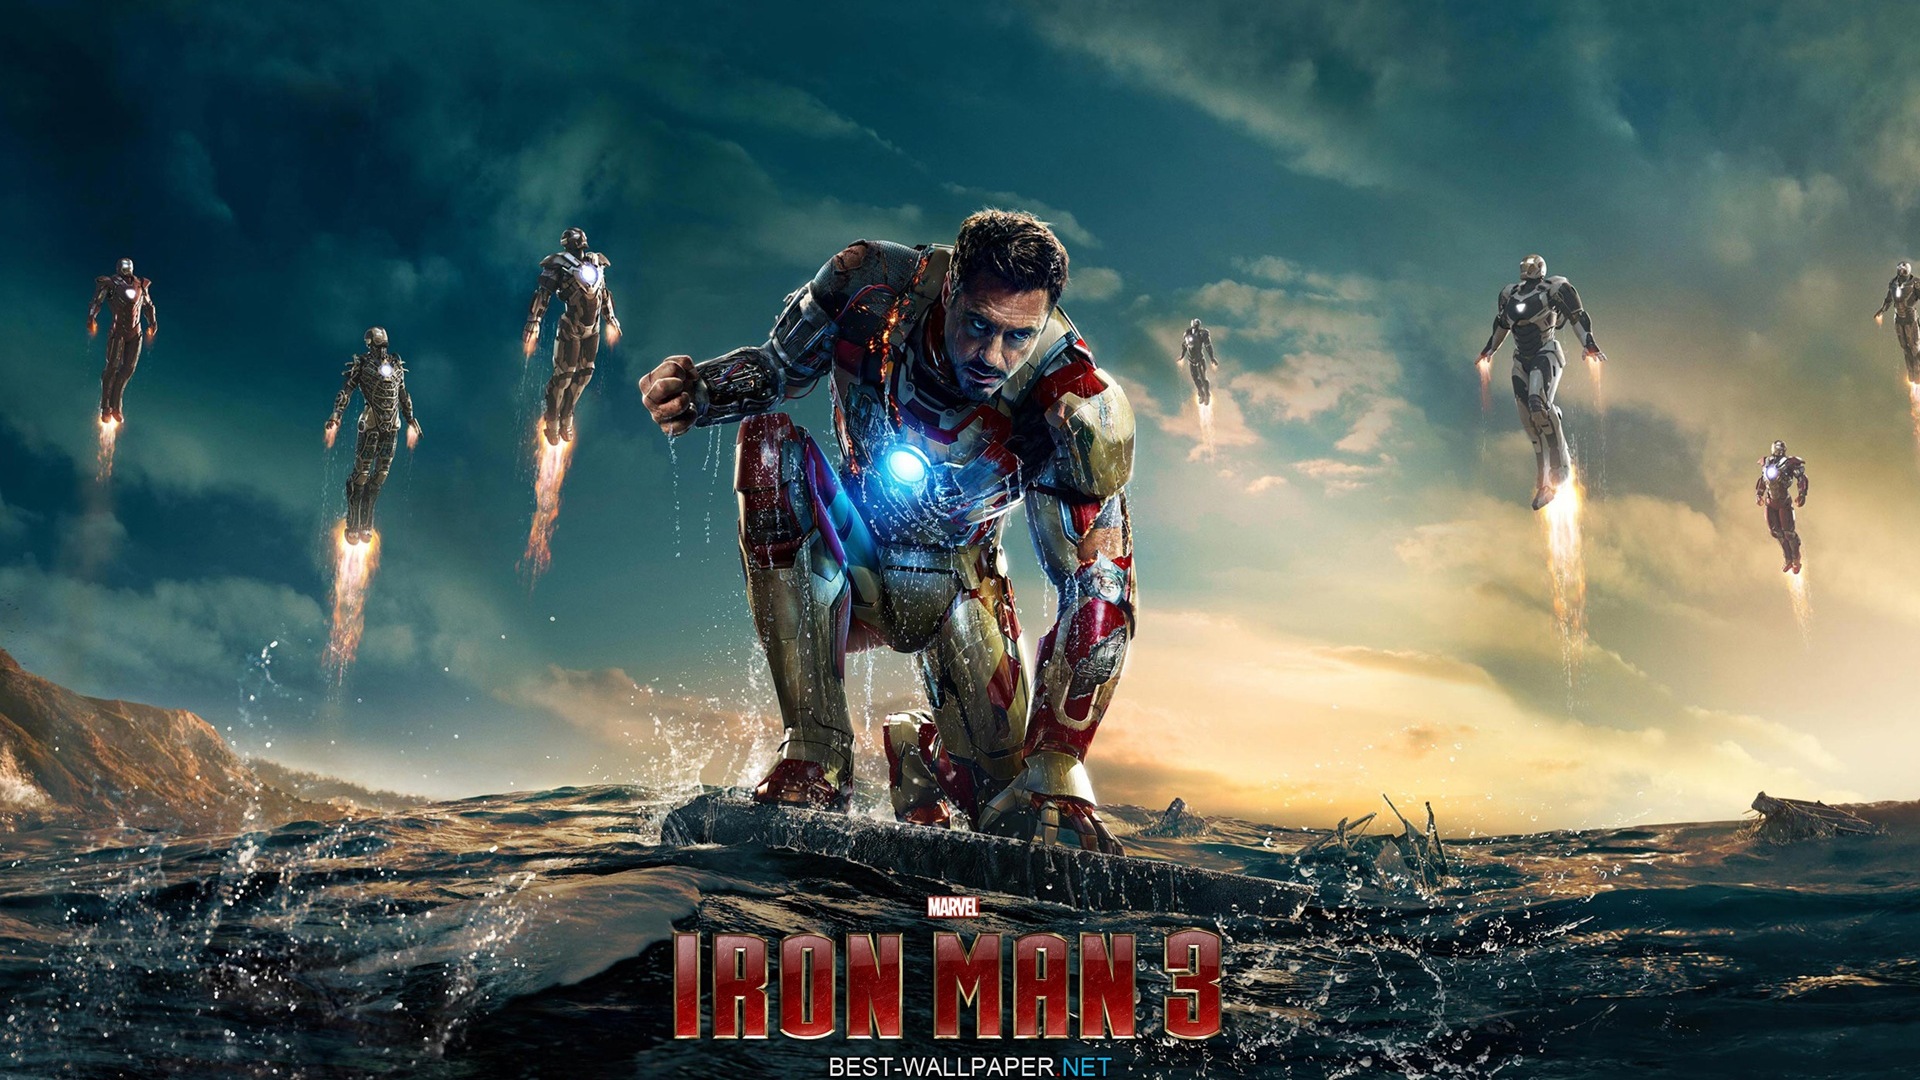 2013 Iron Man 3 newest HD wallpapers #1 - 1920x1080